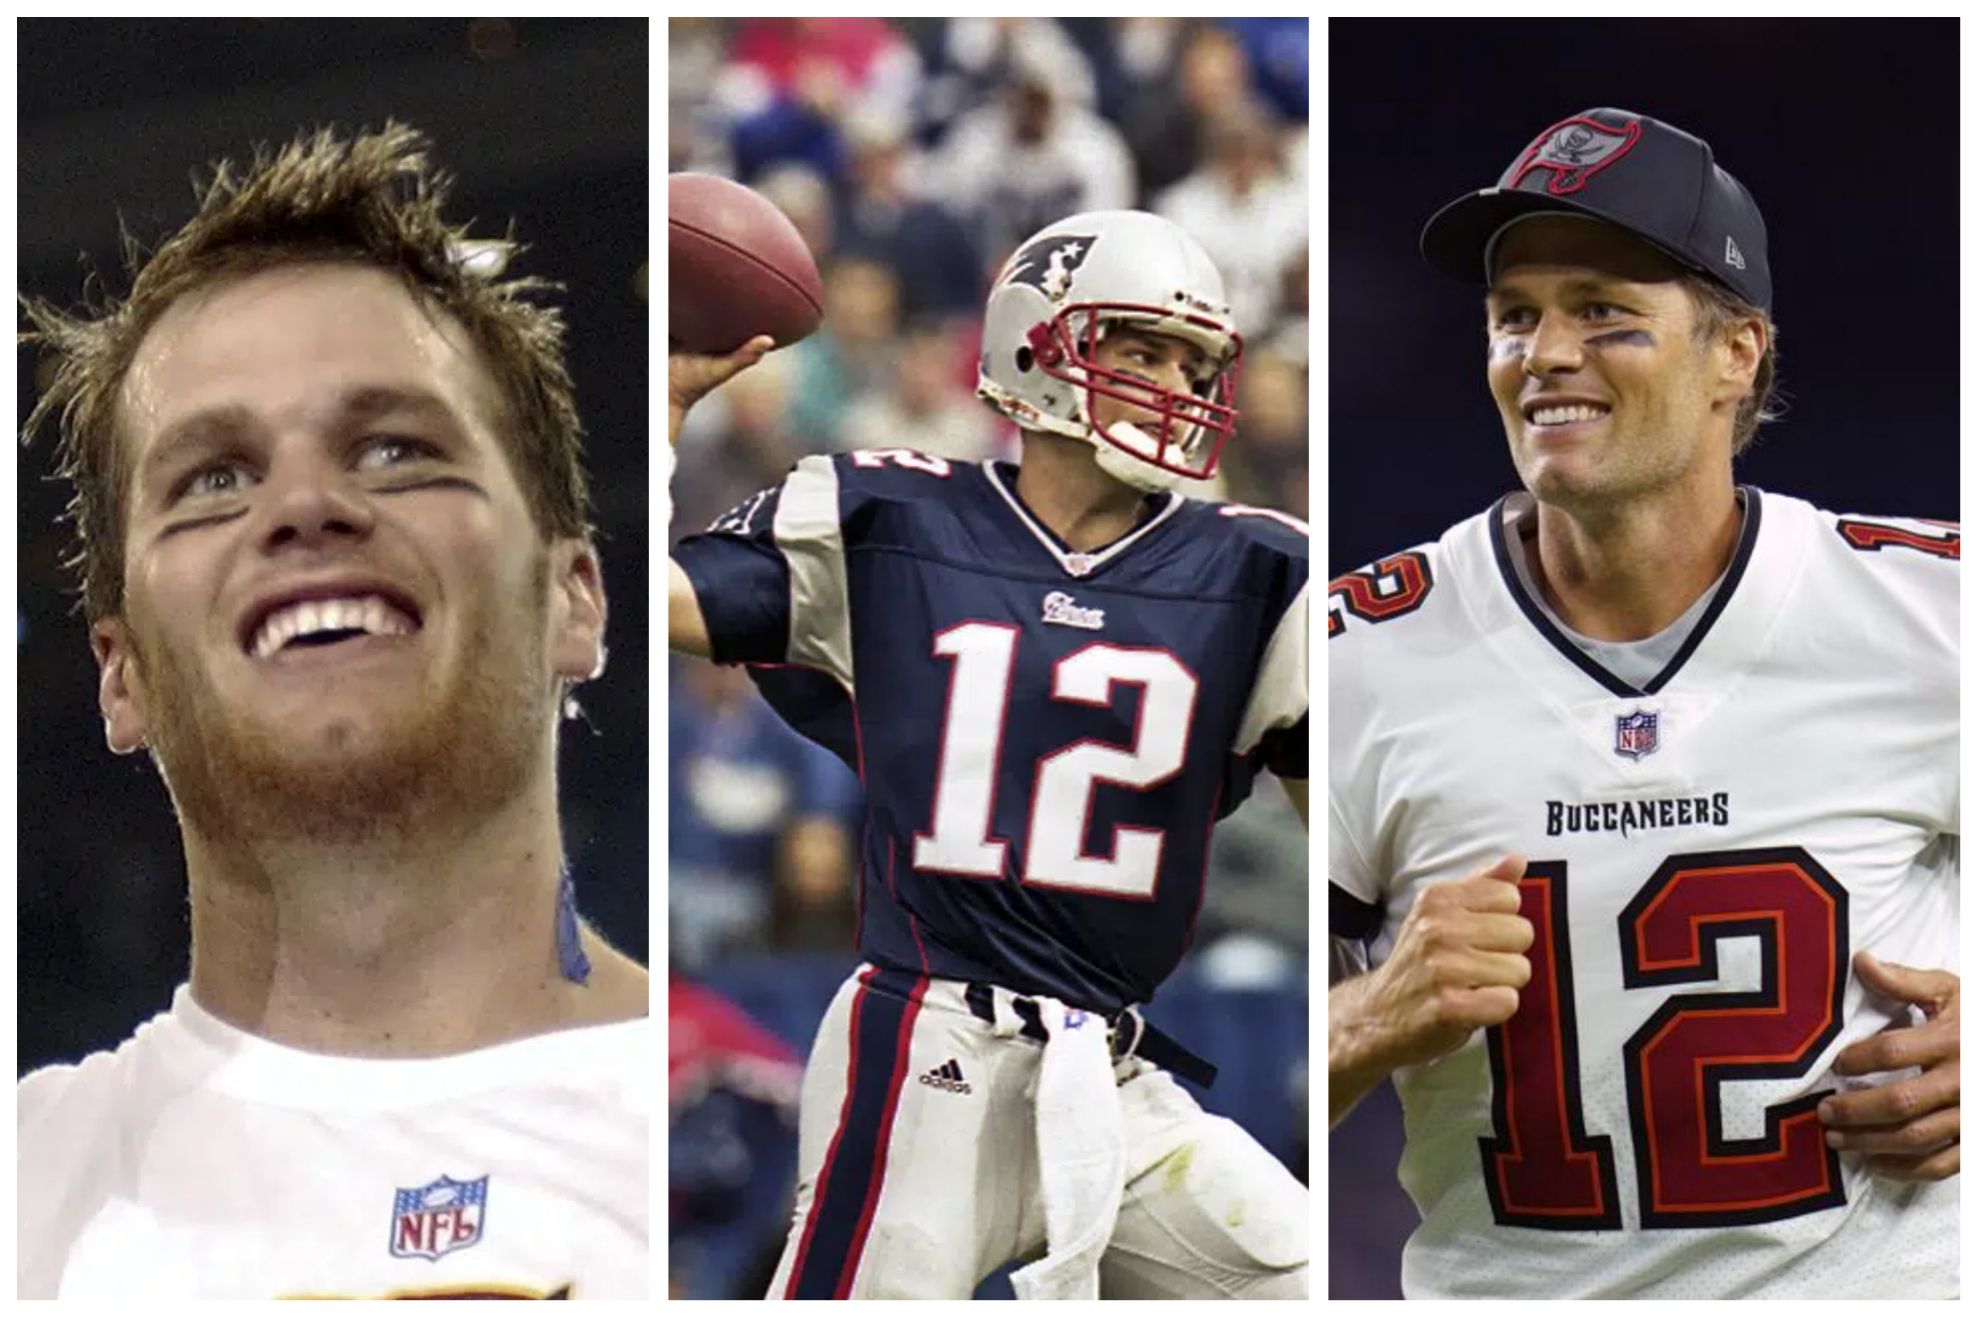 Tom Brady's career and accolades are going to be very difficult to be surpassed.